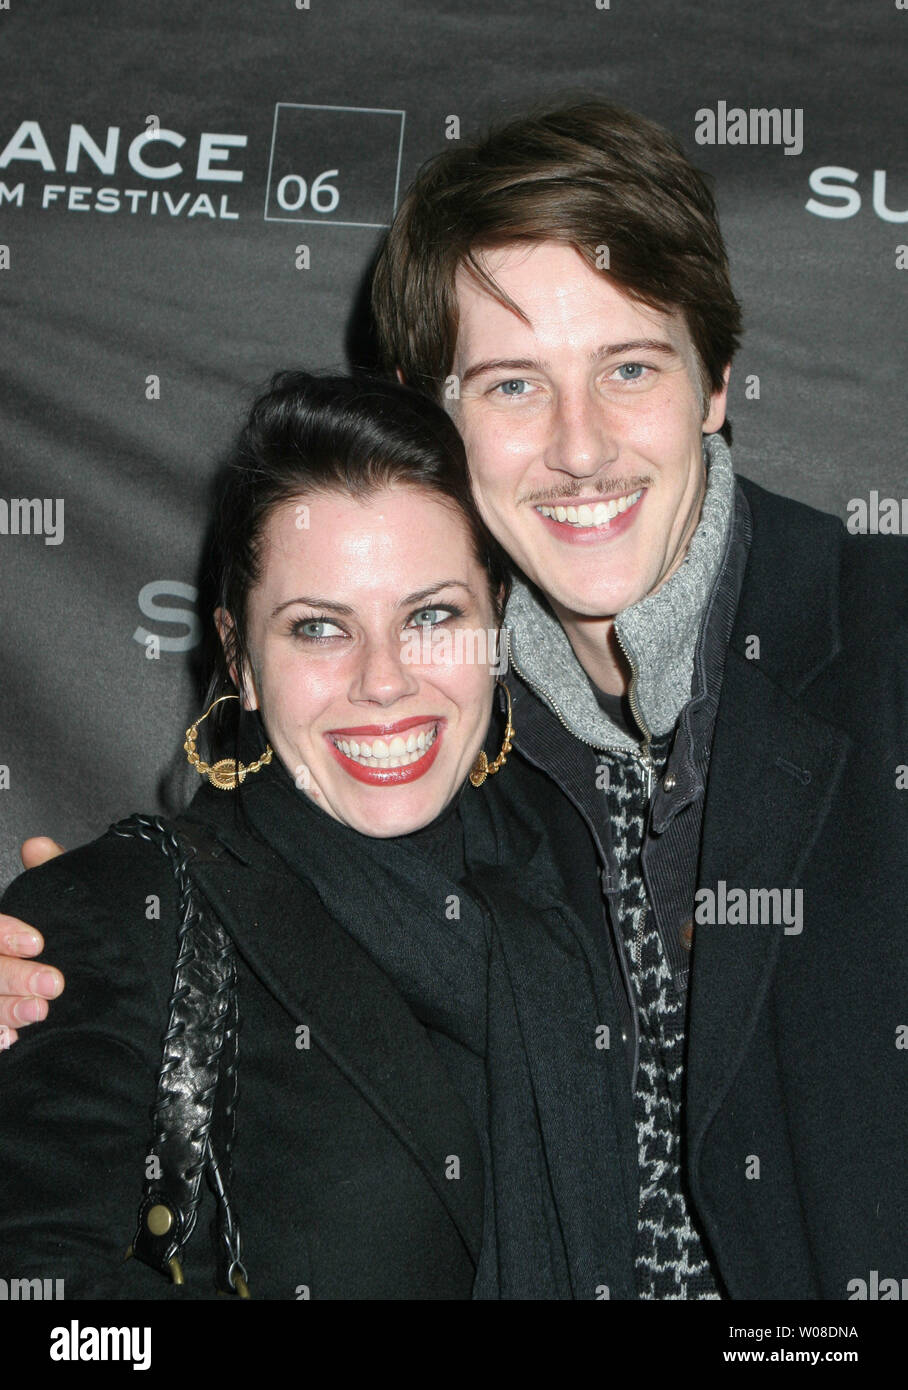 Fairuza Balk and Gabriel Mann arrive for the premiere of 'Don't Come Knocking'  at the Eccles Theatre for  Sundance 06 on January 24, 2006 in Park City, Utah.   (UPI Photo/Roger Wong) Stock Photo